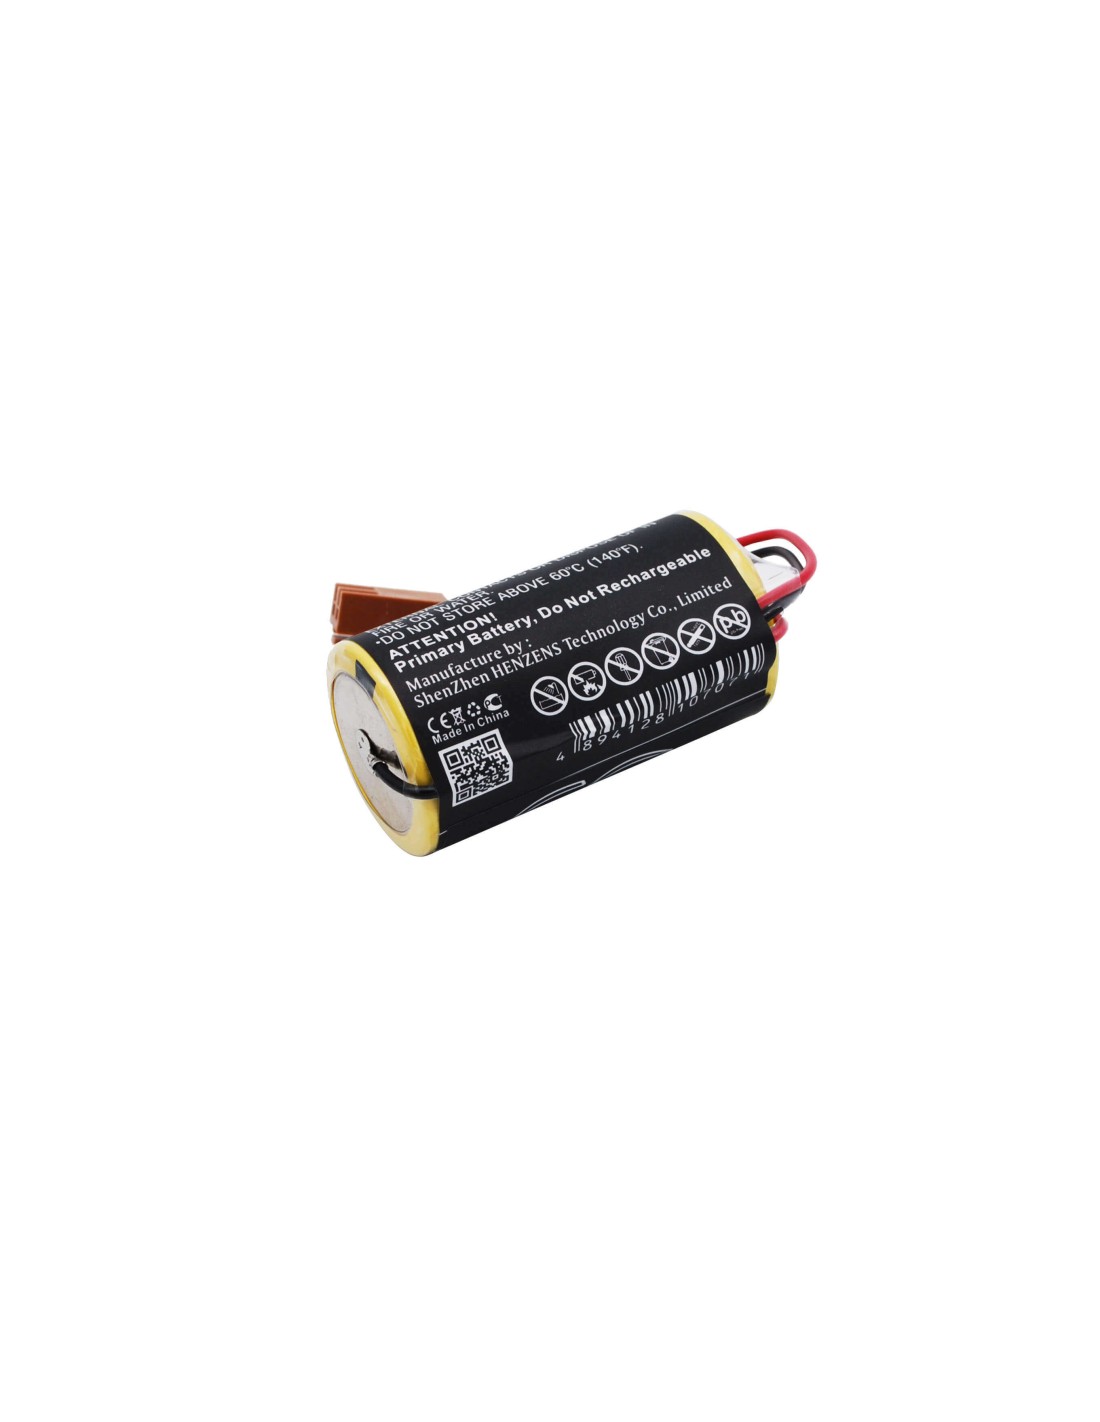 Battery for Fanuc Br-ccf1th , Br-ccf1th 3V, 5000 mAh - 15Wh